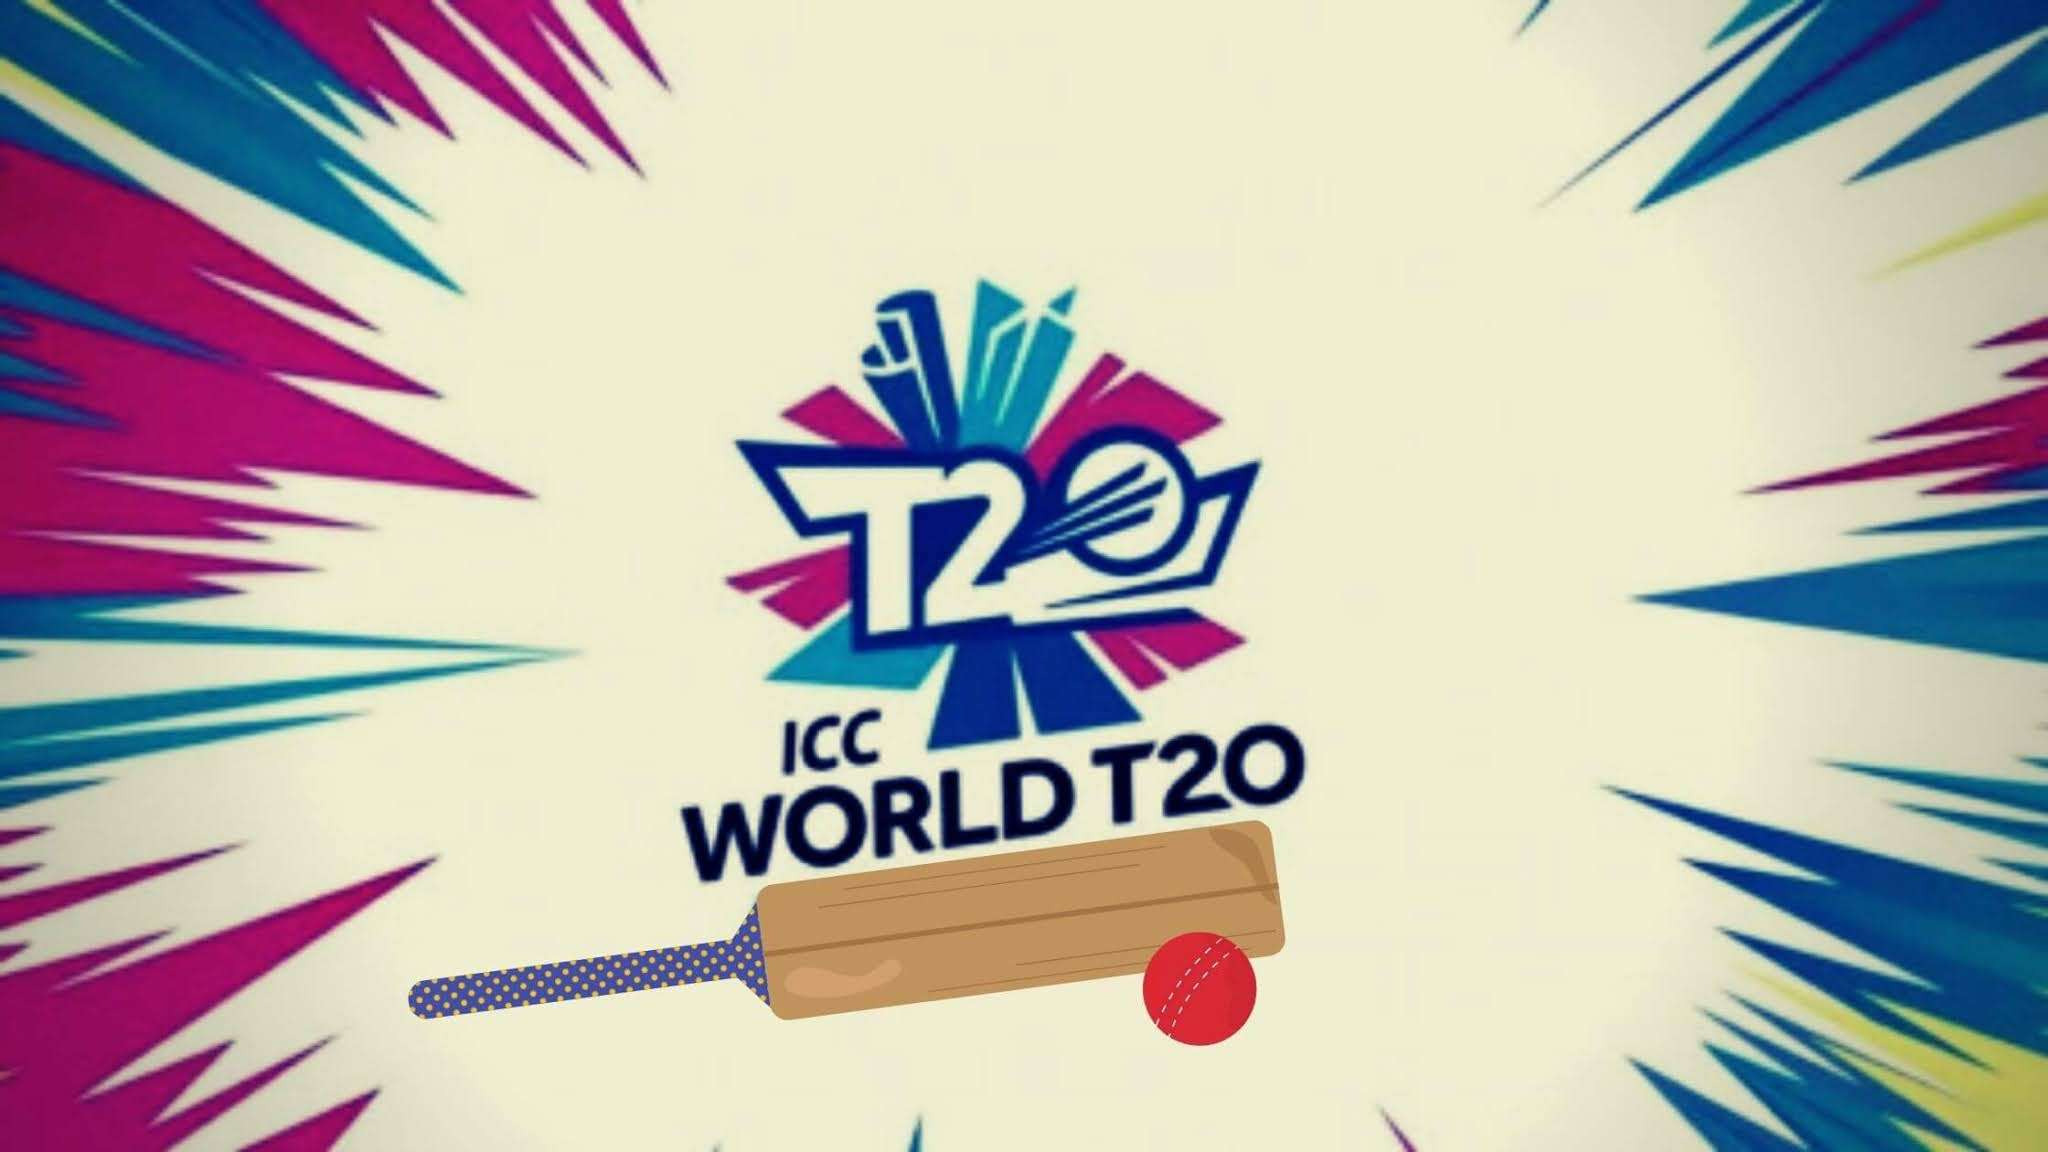 2021 t20 world cup